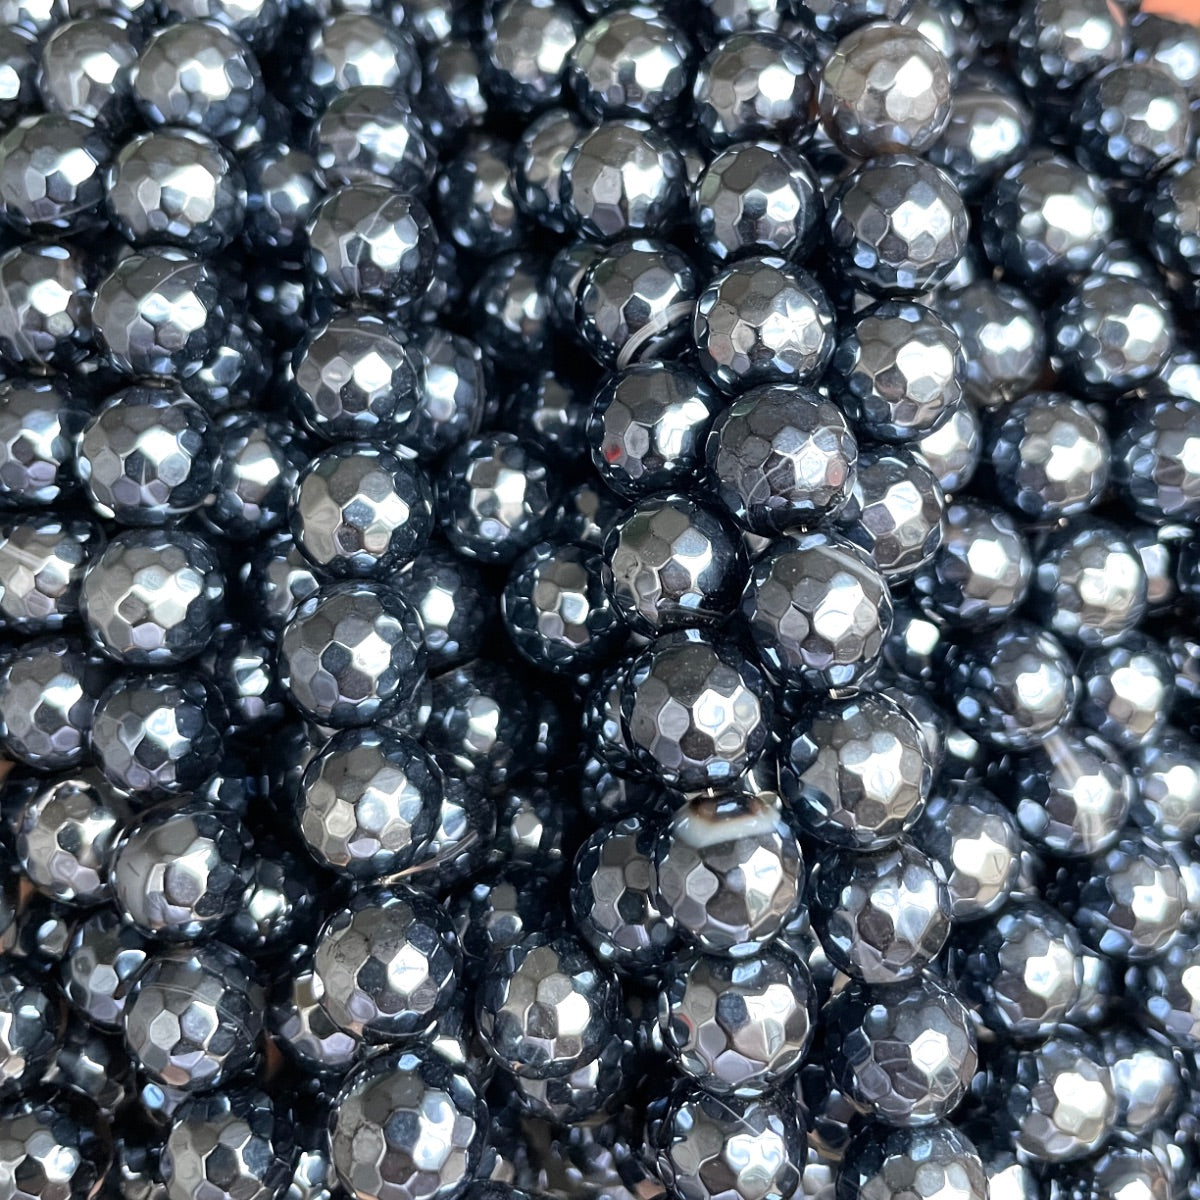 2 Strands/lot 10mm Electroplated Black Onyx Agate Faceted Stone Beads Electroplated Beads Electroplated Faceted Agate Beads New Beads Arrivals Charms Beads Beyond